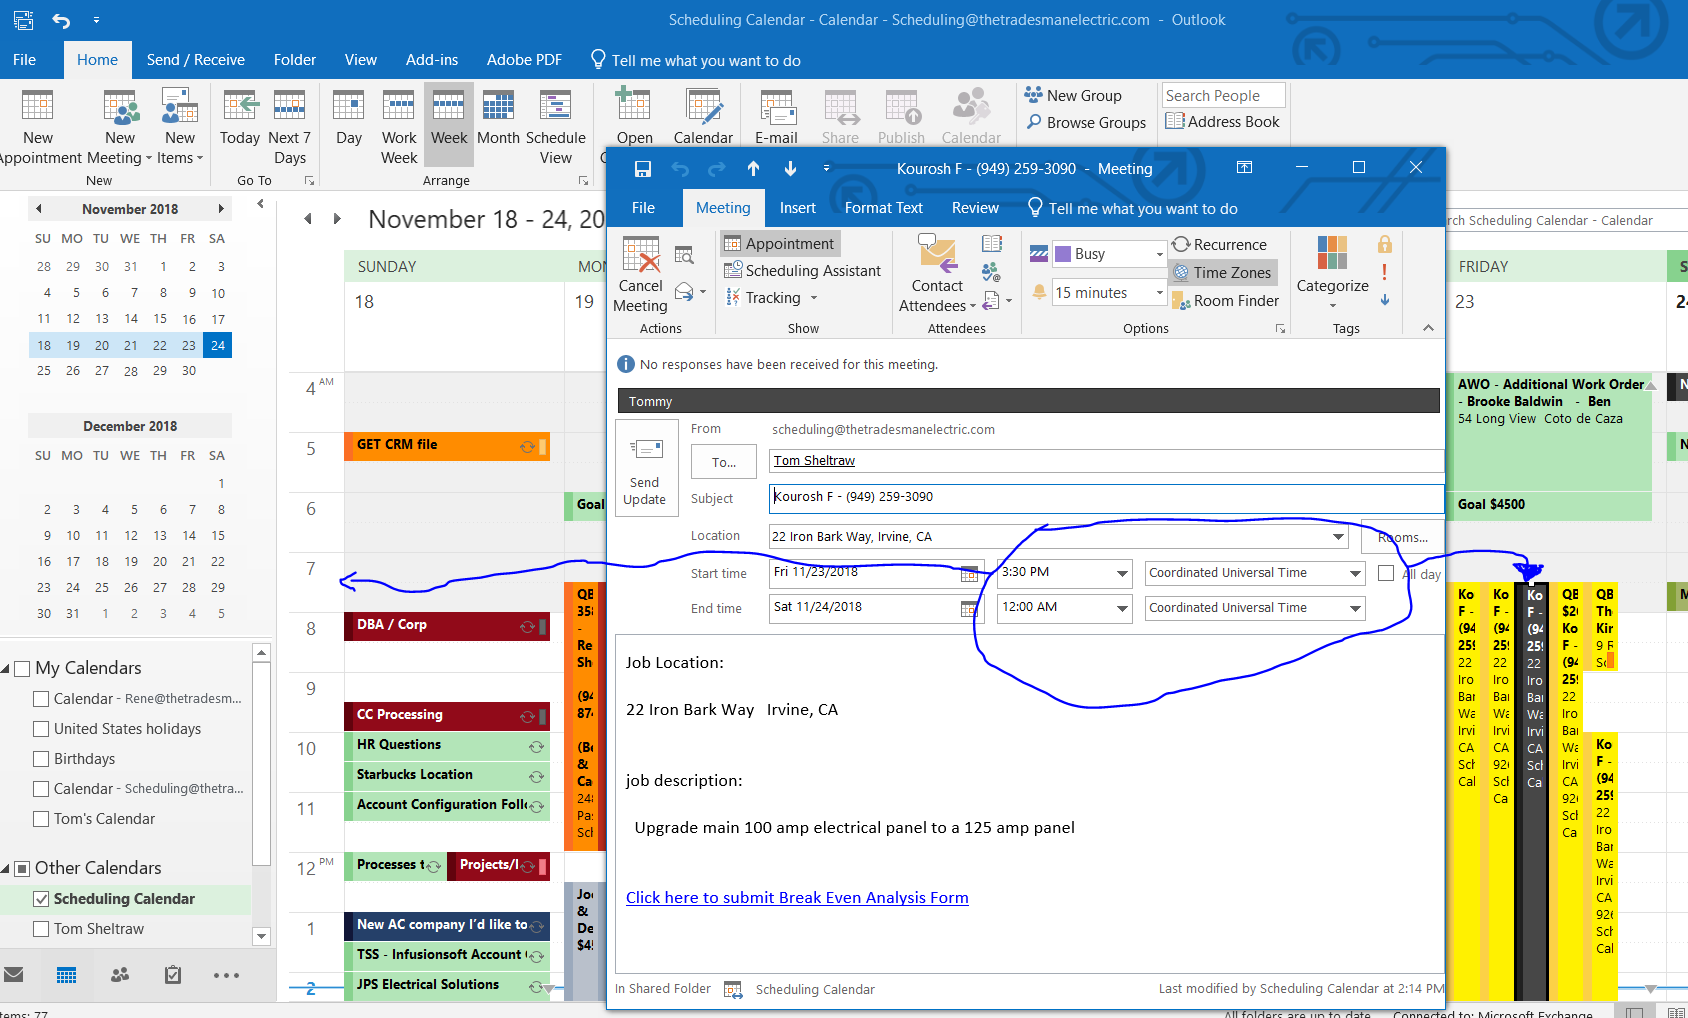 How To Remove Focus Time In Outlook Calendar prntbl